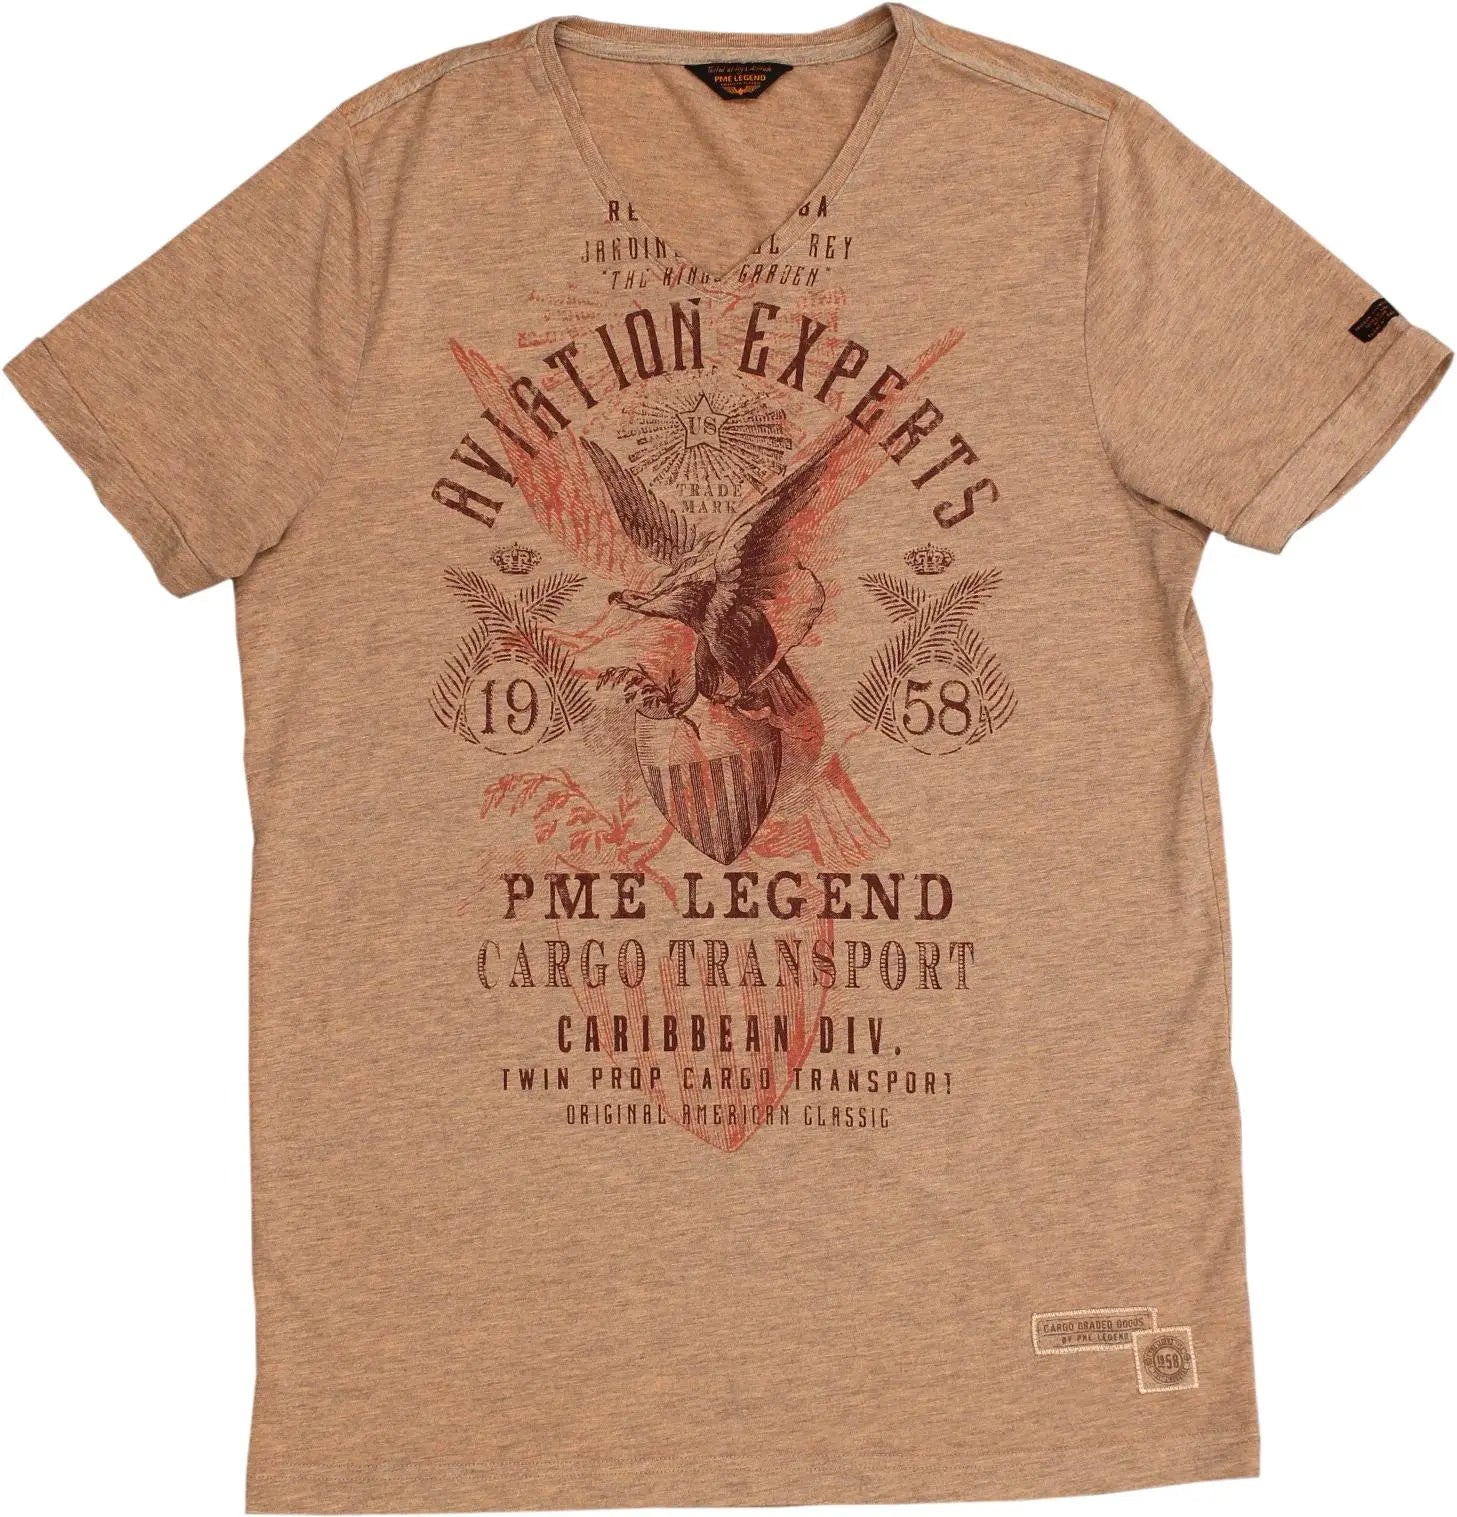 PME Legend - WHITE0165- ThriftTale.com - Vintage and second handclothing